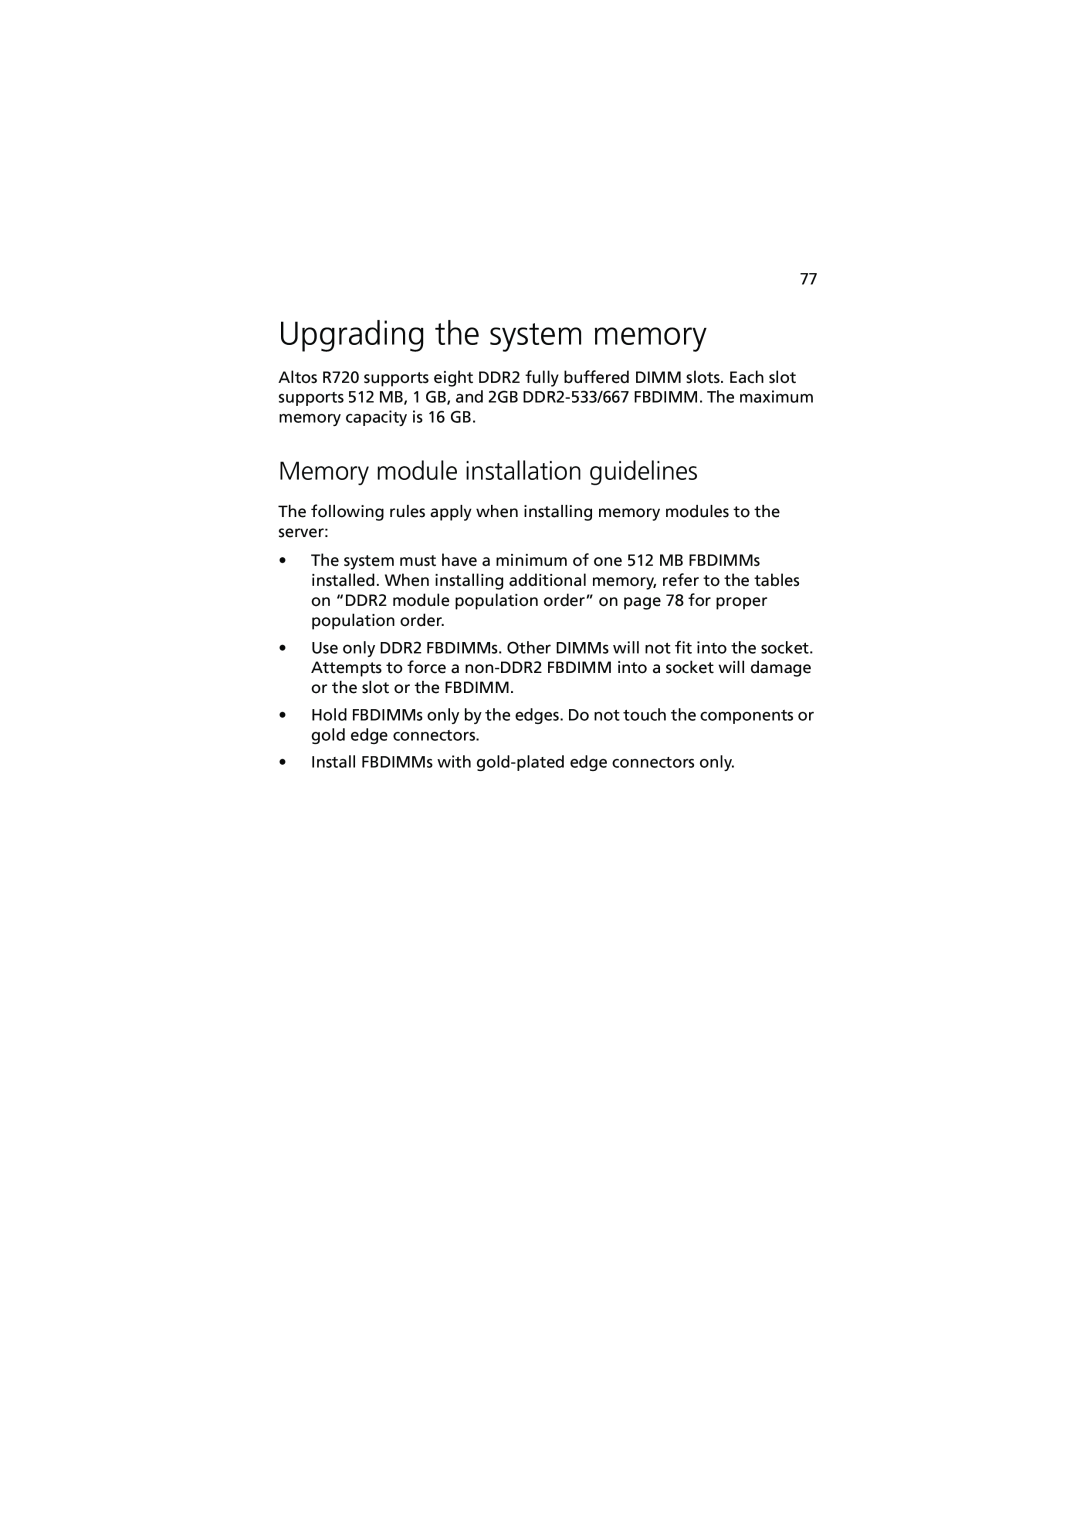 Acer R720 Series manual Upgrading the system memory, Memory module installation guidelines 